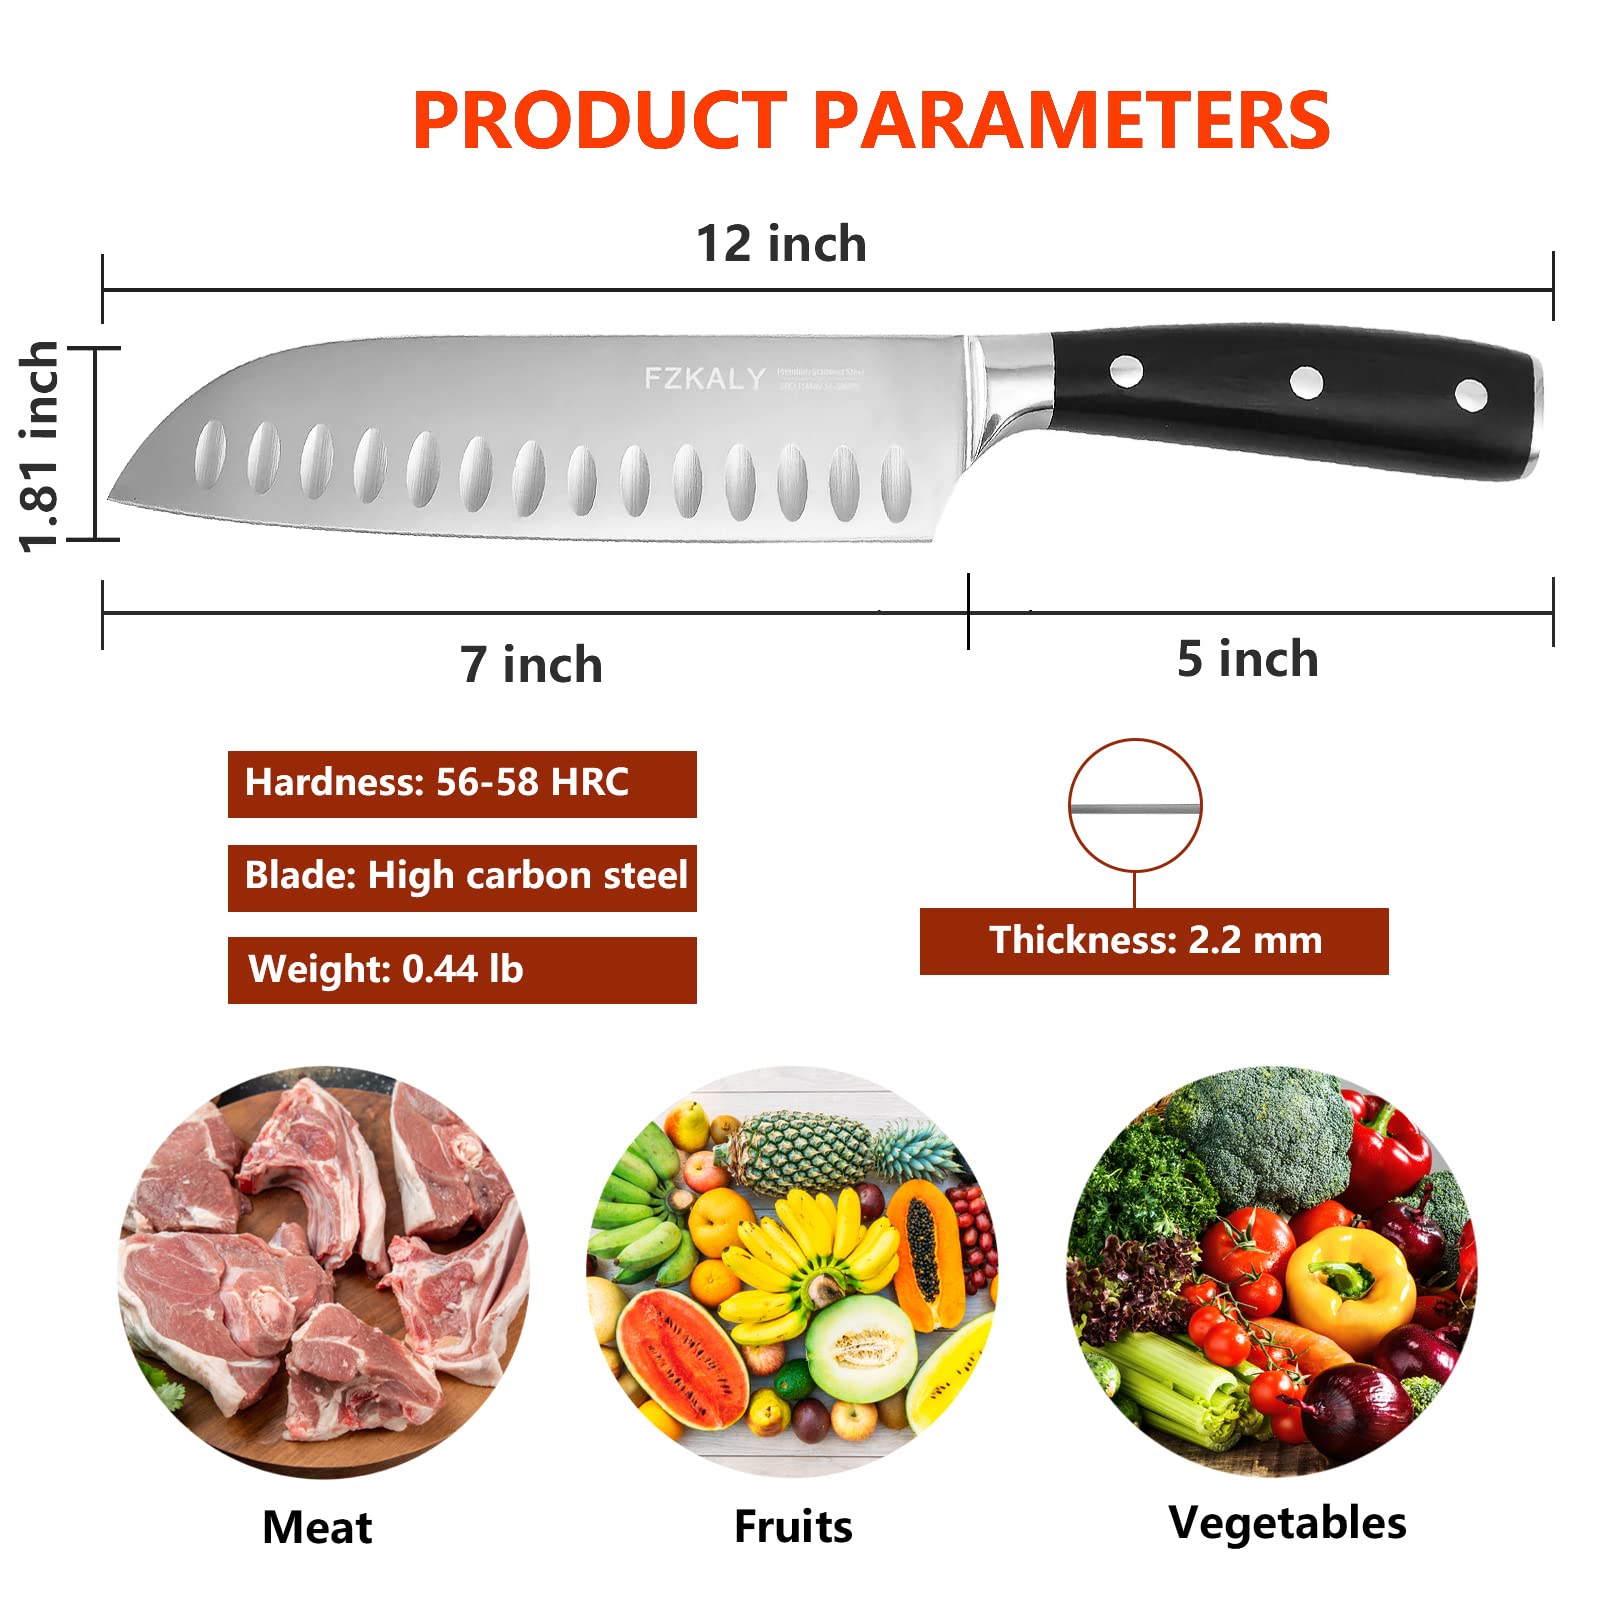 Fzkaly Santoku Knives, Sharp 7-inch Santoku knife, High Carbon Stainless Steel Japanese Chef Knife, Ergonomic Pakkawood Handle Cooking Knife for Meat Vegetable Fruit in Gift Box